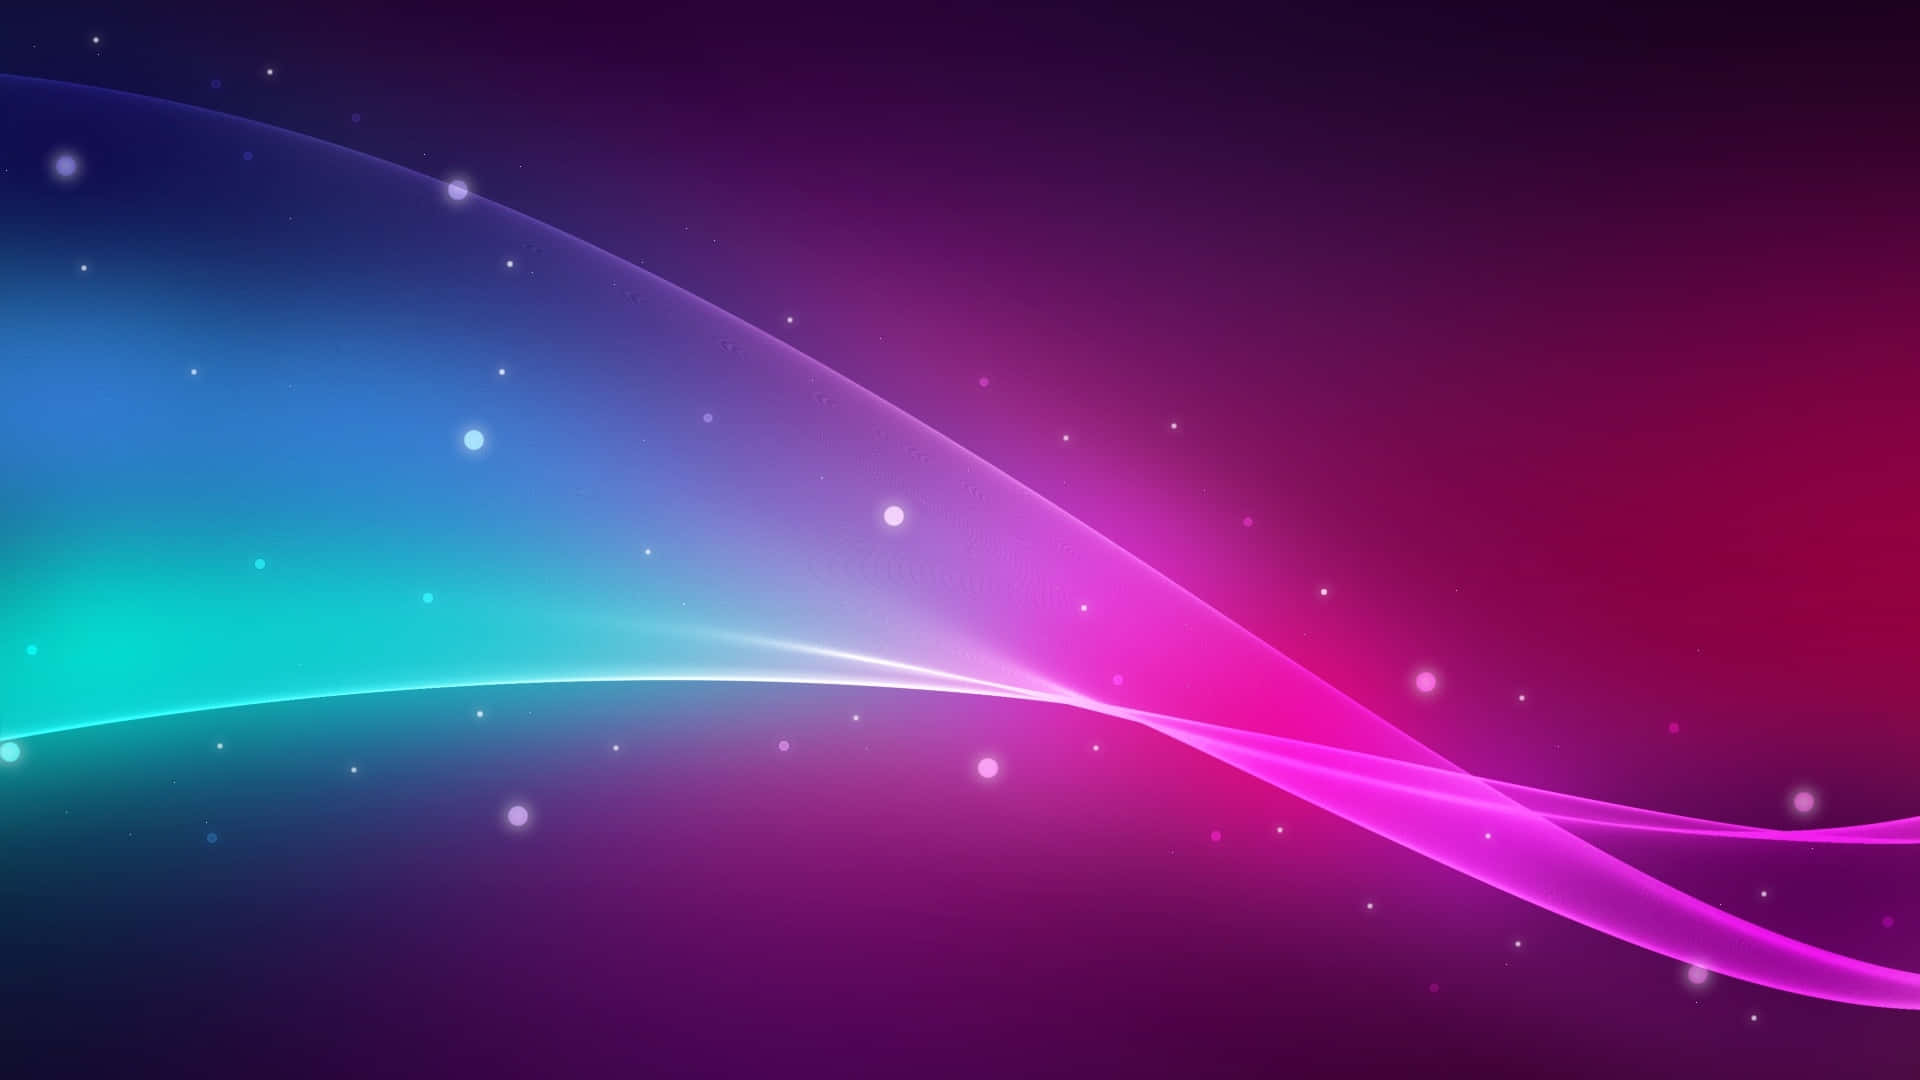 Abstract Purple and Pink Digital Wallpaper